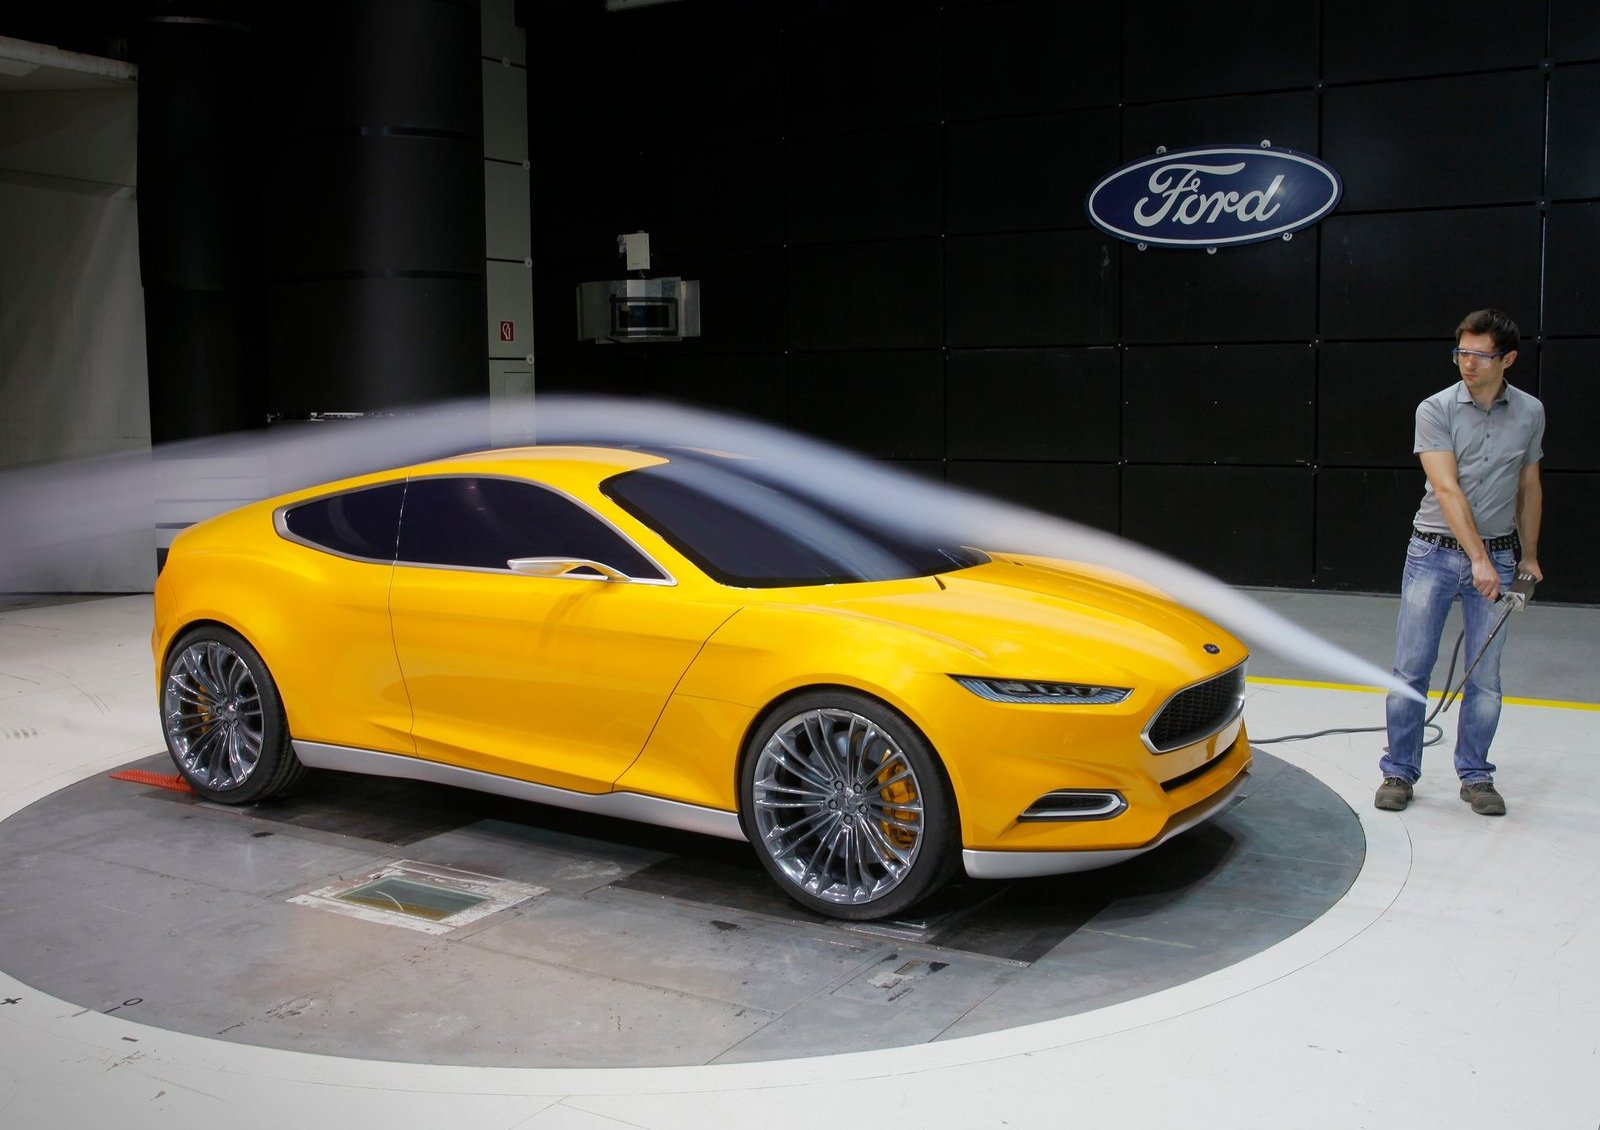 Ford Evos - 2013 FORD FUSION to Use 1.6-liter Ecoboost Engine ...